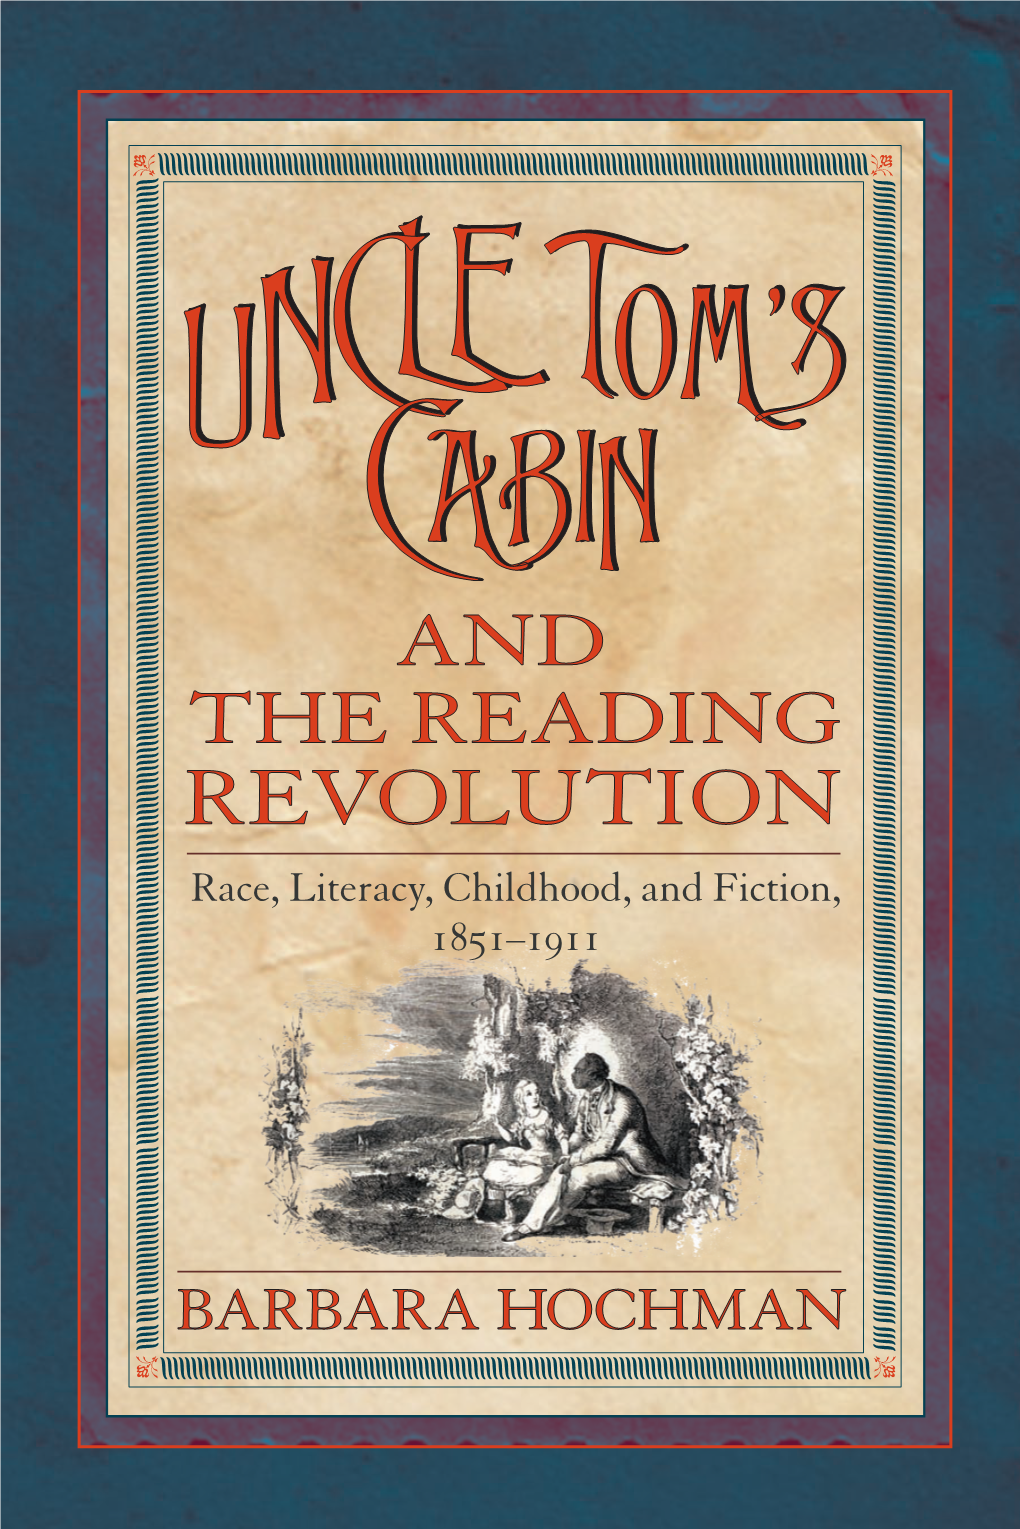 "Uncle Tom's Cabin" and the Reading Revolution: Race, Literacy